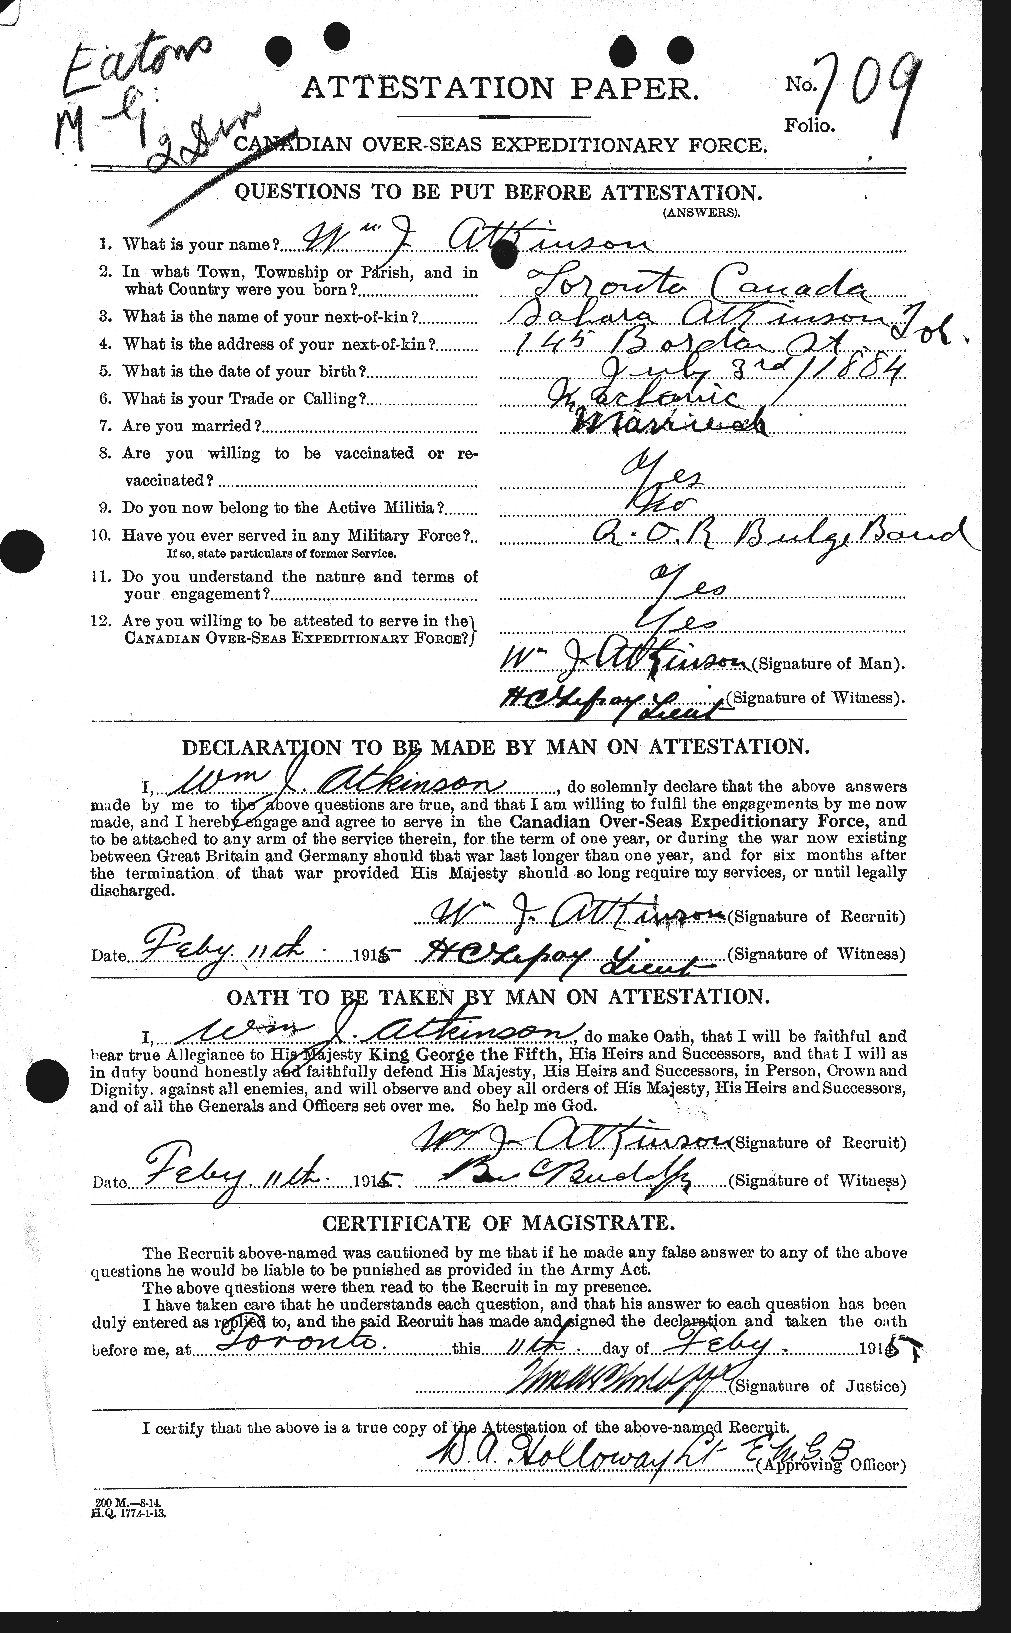 Personnel Records of the First World War - CEF 224180a